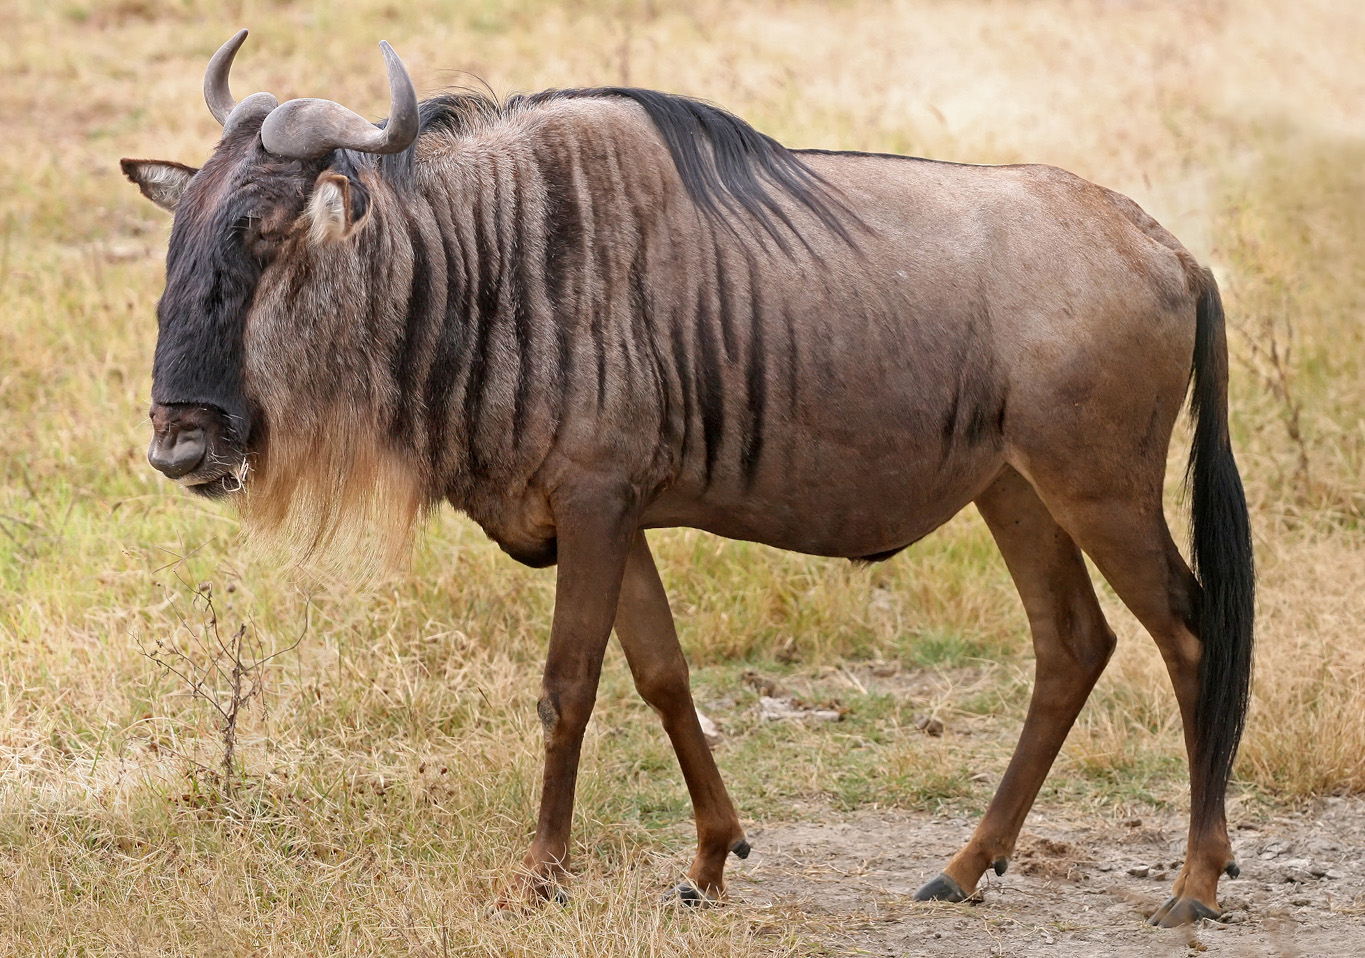 &lt;strong&gt;Figure 1.&lt;/strong&gt; A blue wildebeest—a large African herbivore that lives in herds that might stretch for many kilometers—at the Ngorongoro Crater in Tanzania. Figure courtesy of Muhammad Mahdi Karim via &lt;a href=&quot;https://en.wikipedia.org/wiki/File:Blue_Wildebeest,_Ngorongoro.jpg&quot; rel=&quot;noopener noreferrer&quot; target=&quot;_blank&quot;&gt;Wikimedia Commons&lt;/a&gt;.